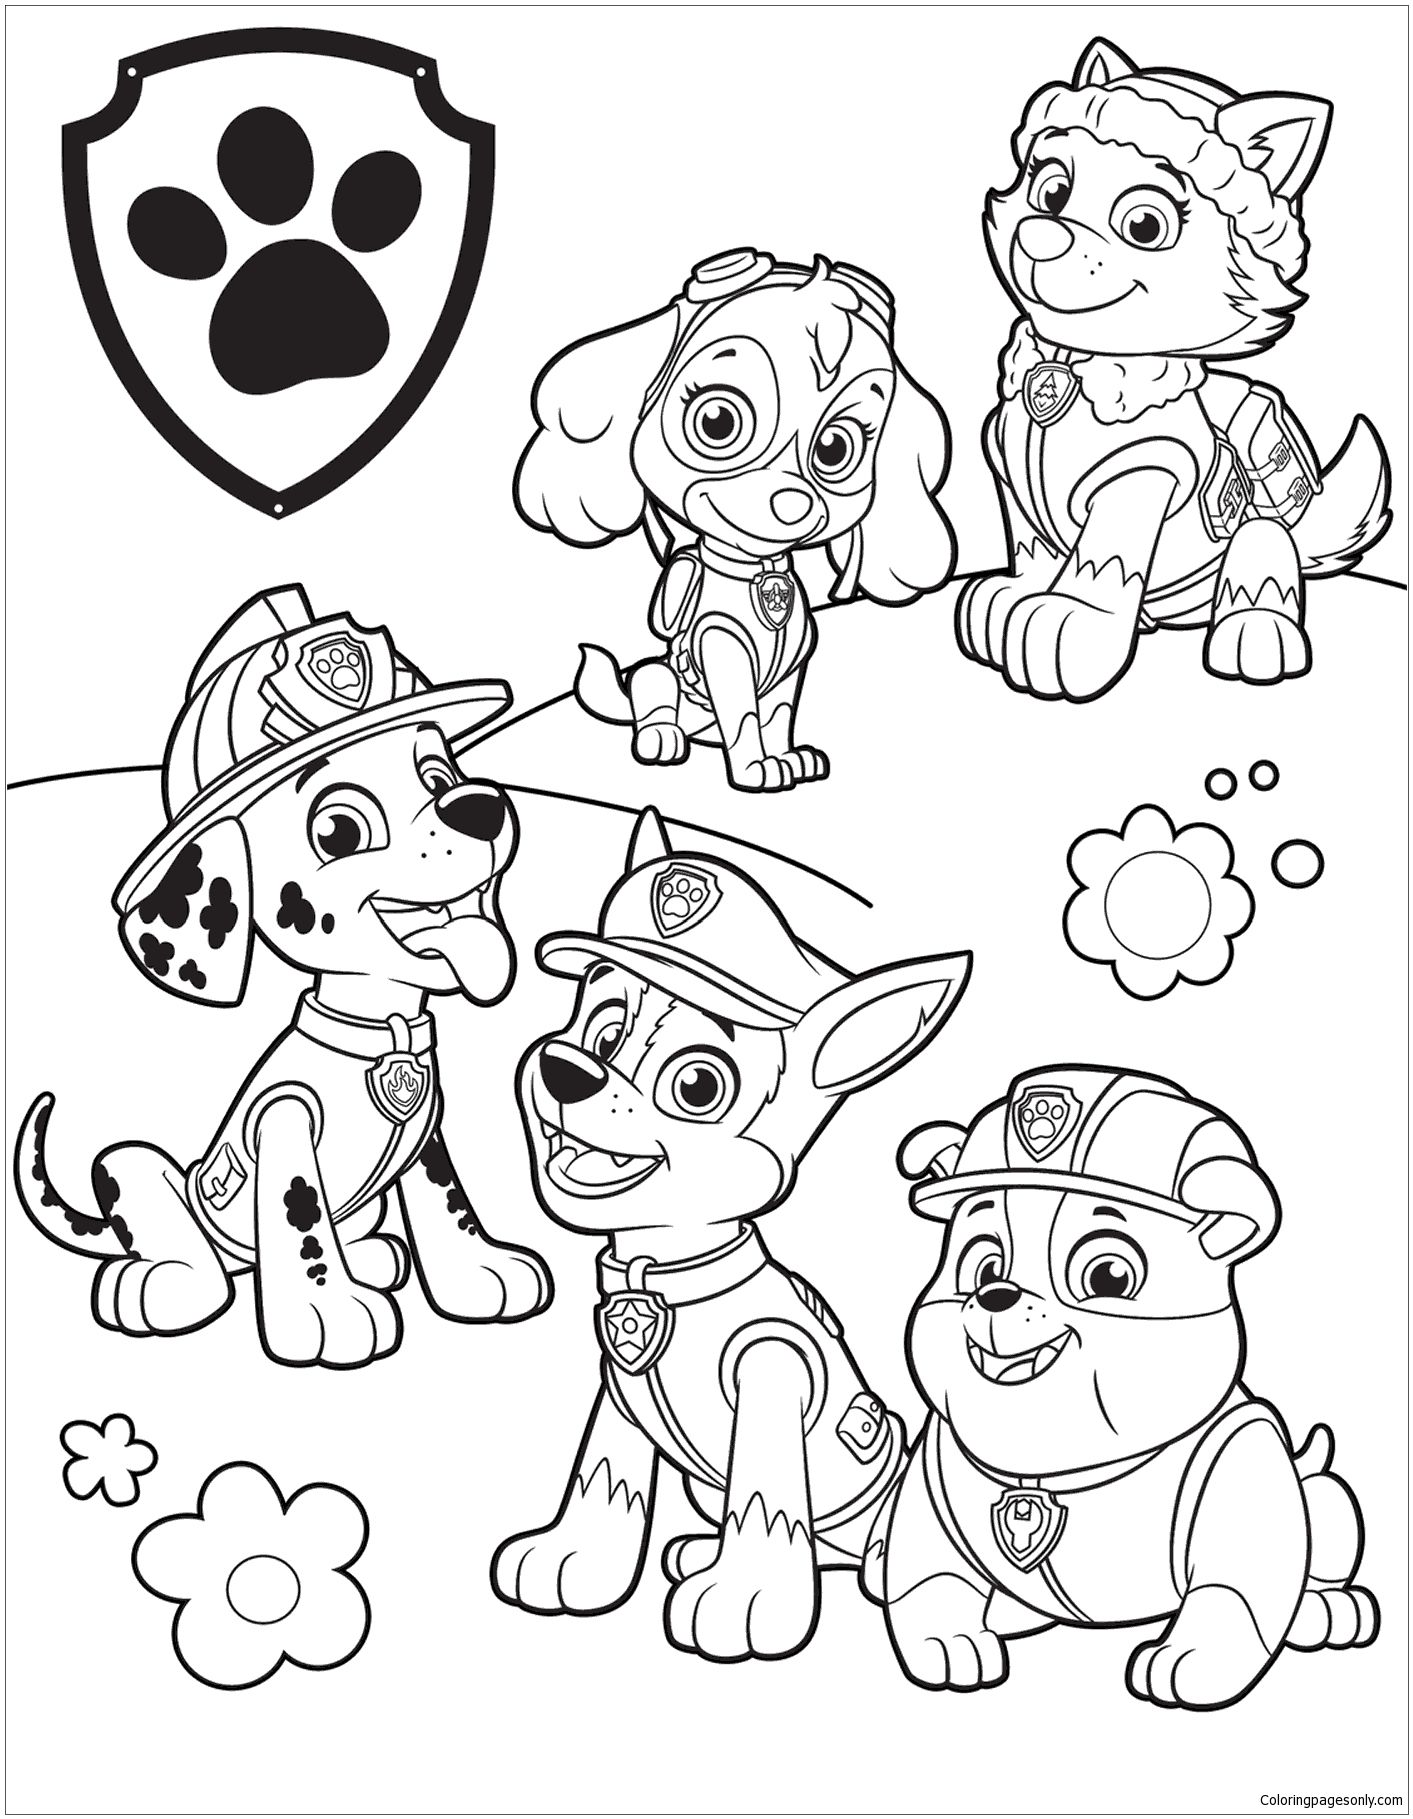 15 Best Paw Patrol Coloring Pages - Visual Arts Ideas